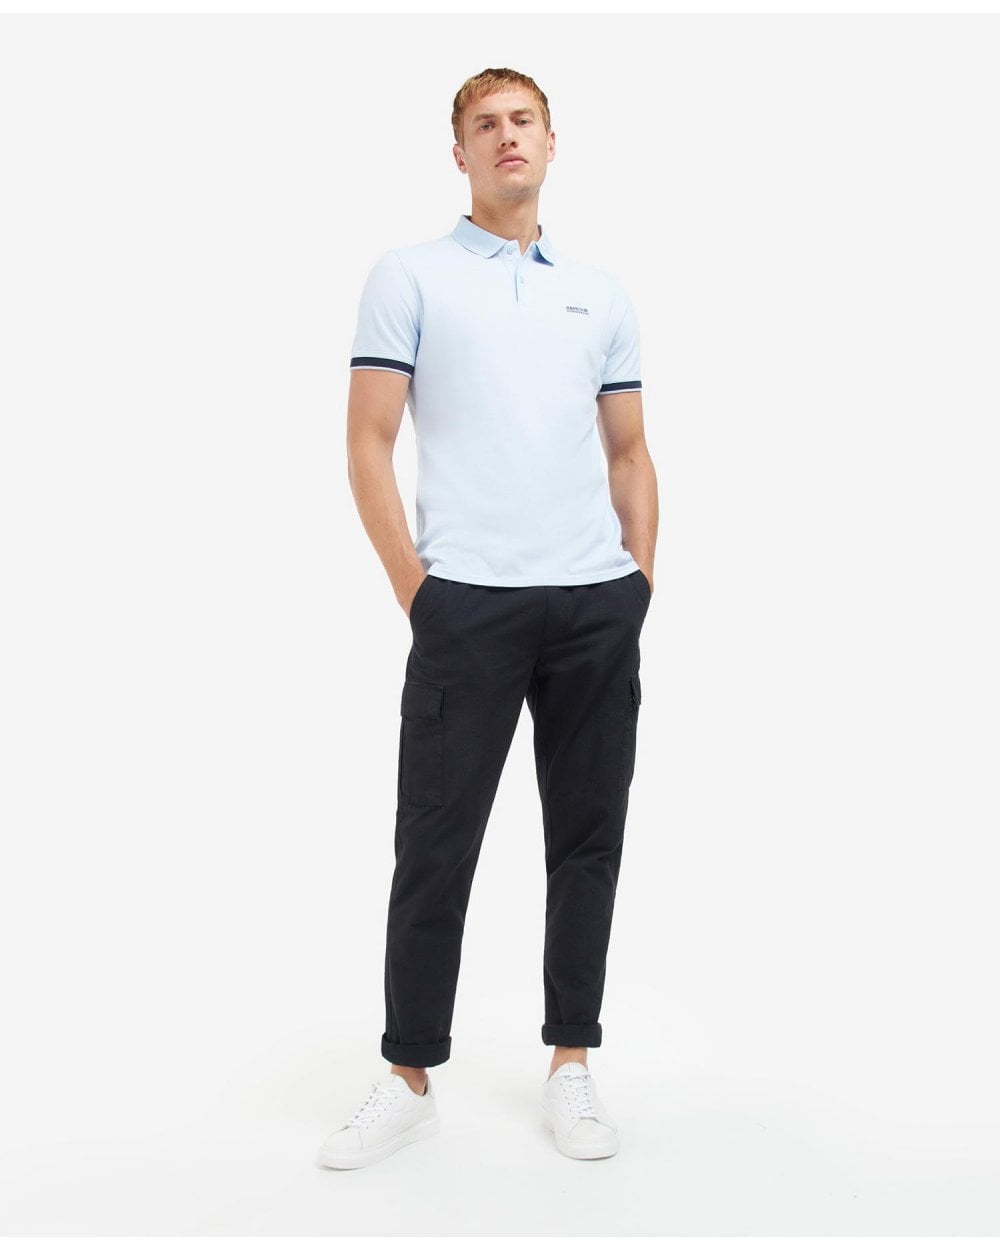 Whateley Polo Shirt